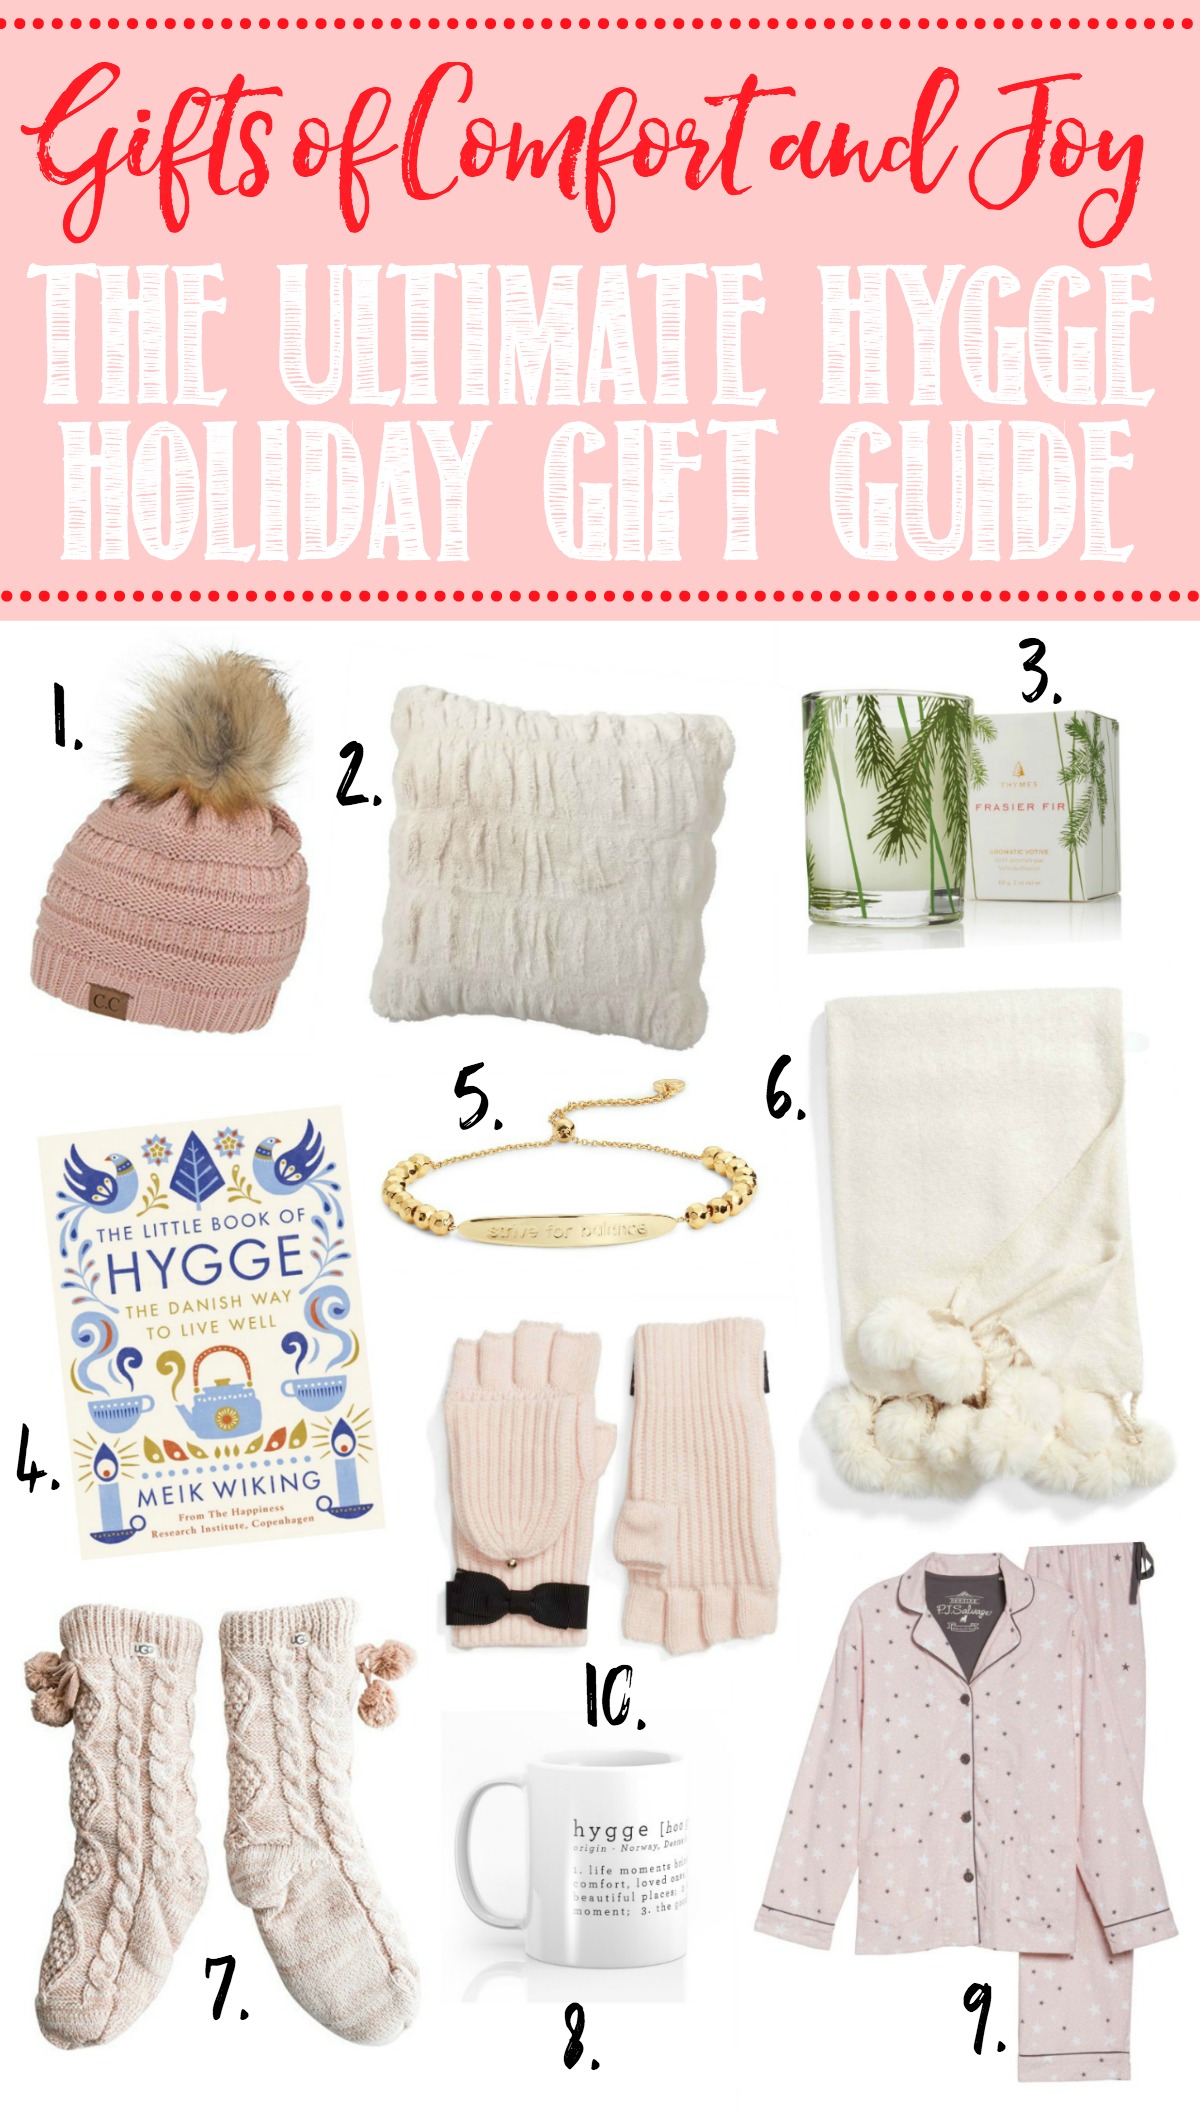 My Favorite Things // Gift Guide for Her - This is our Bliss